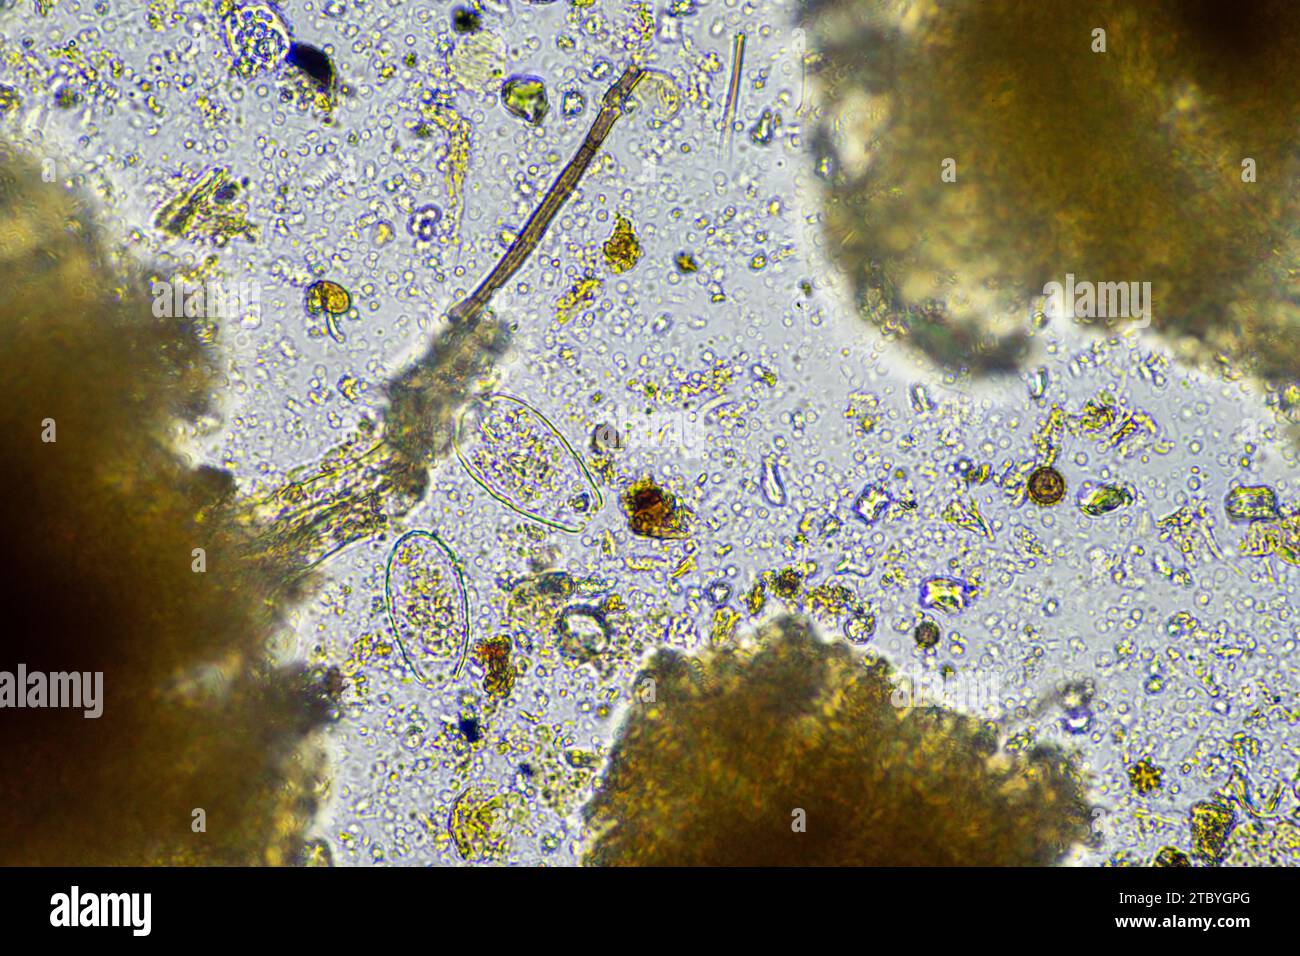 microscopic fungus and microorganisms in a sample in australia Stock Photo